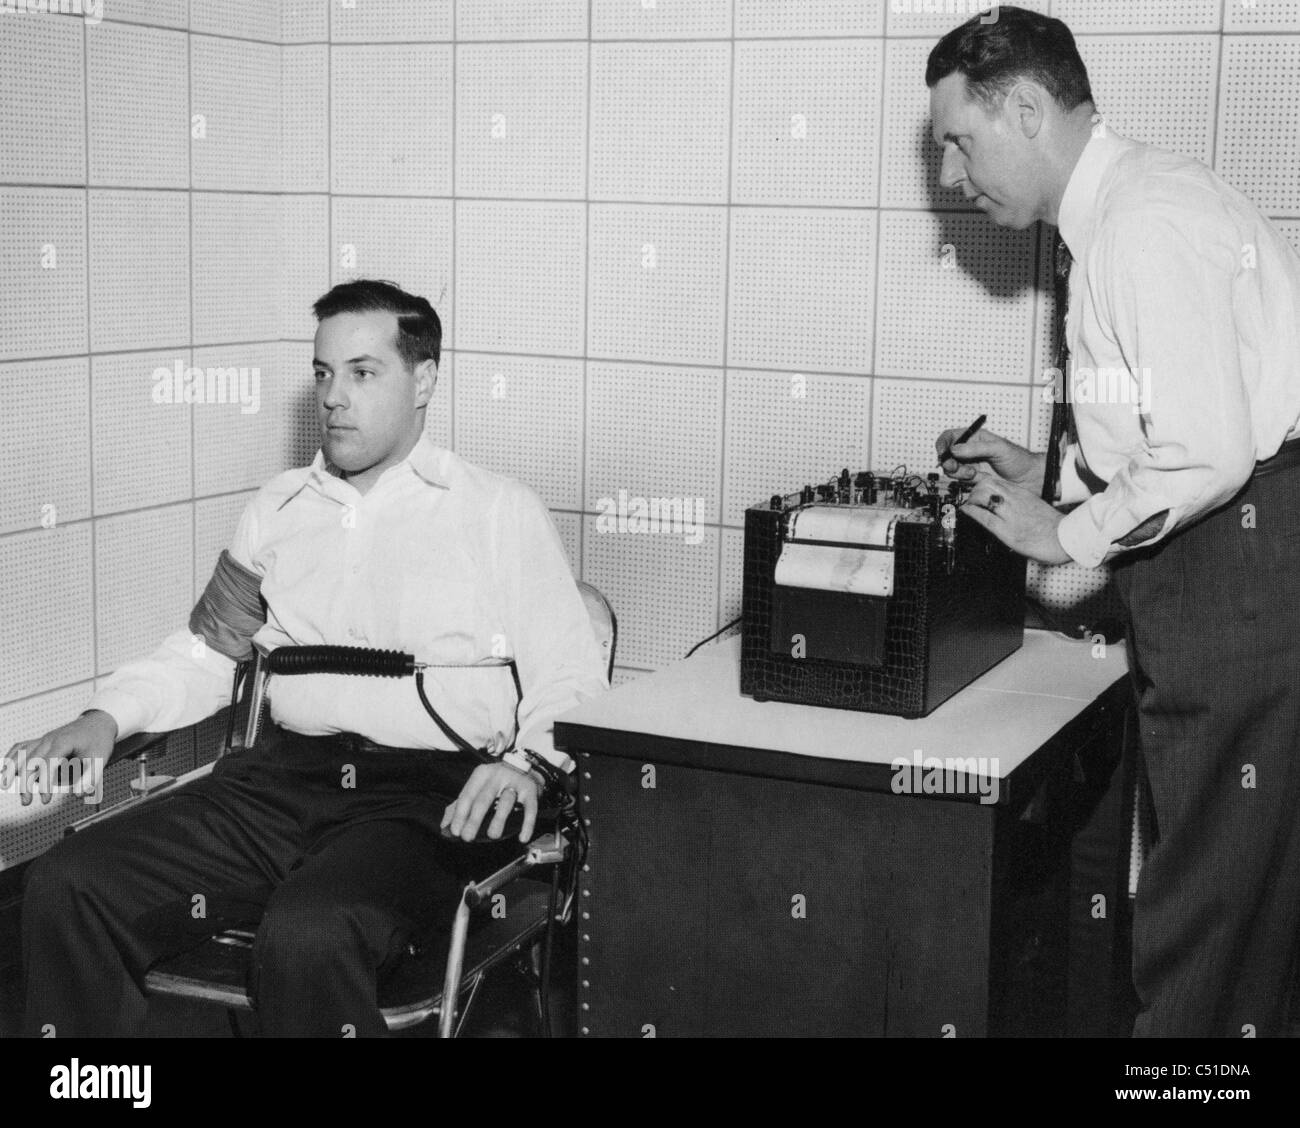 LIE DETECTOR John Larson at right demonstrating his 'polygraph' lie detector machine at Northwestern University about 1936 Stock Photo